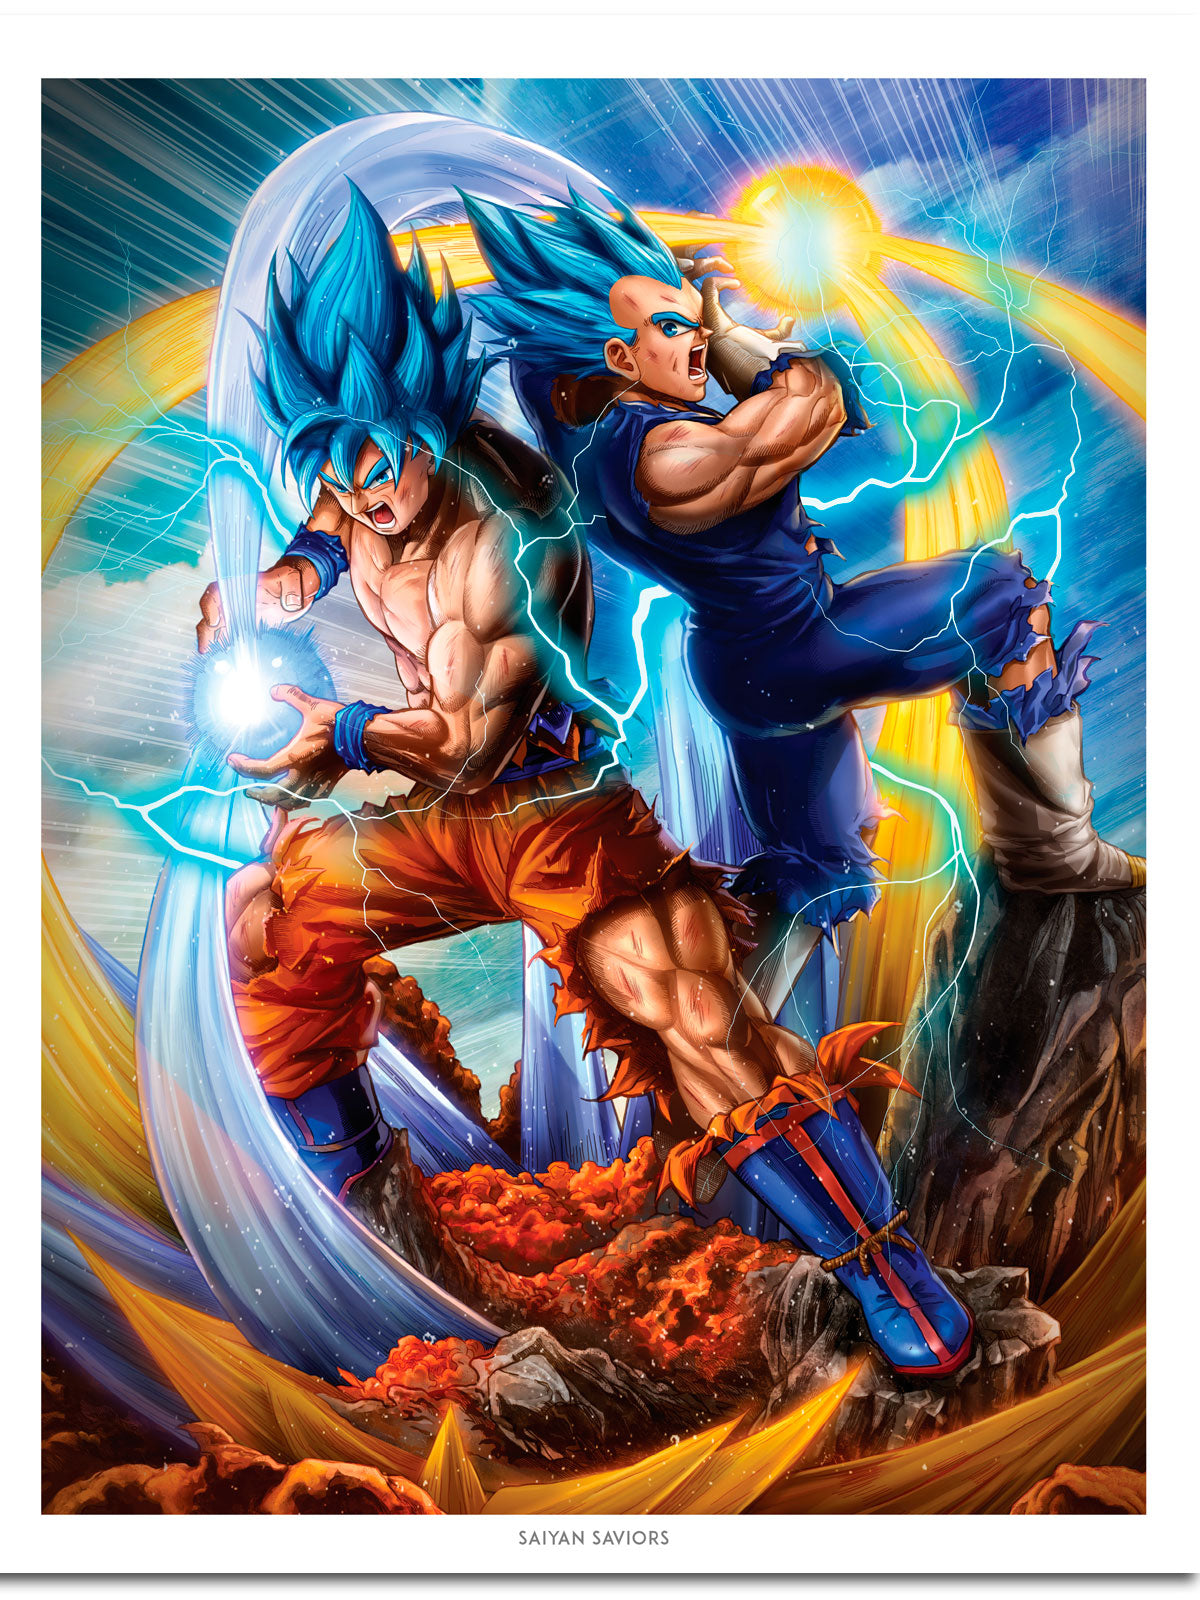 "Saiyan Saviors" Dragon Ball Z Art Print by Dominic Glover  Dominic Glover's art prints are made with museum quality satin and inks designed to last a lifetime, in-fact several lifetimes.  Print Size: 16 inches by 20 inches Printed on premium quality 350# UV Gloss cover stock paper Made in the USA